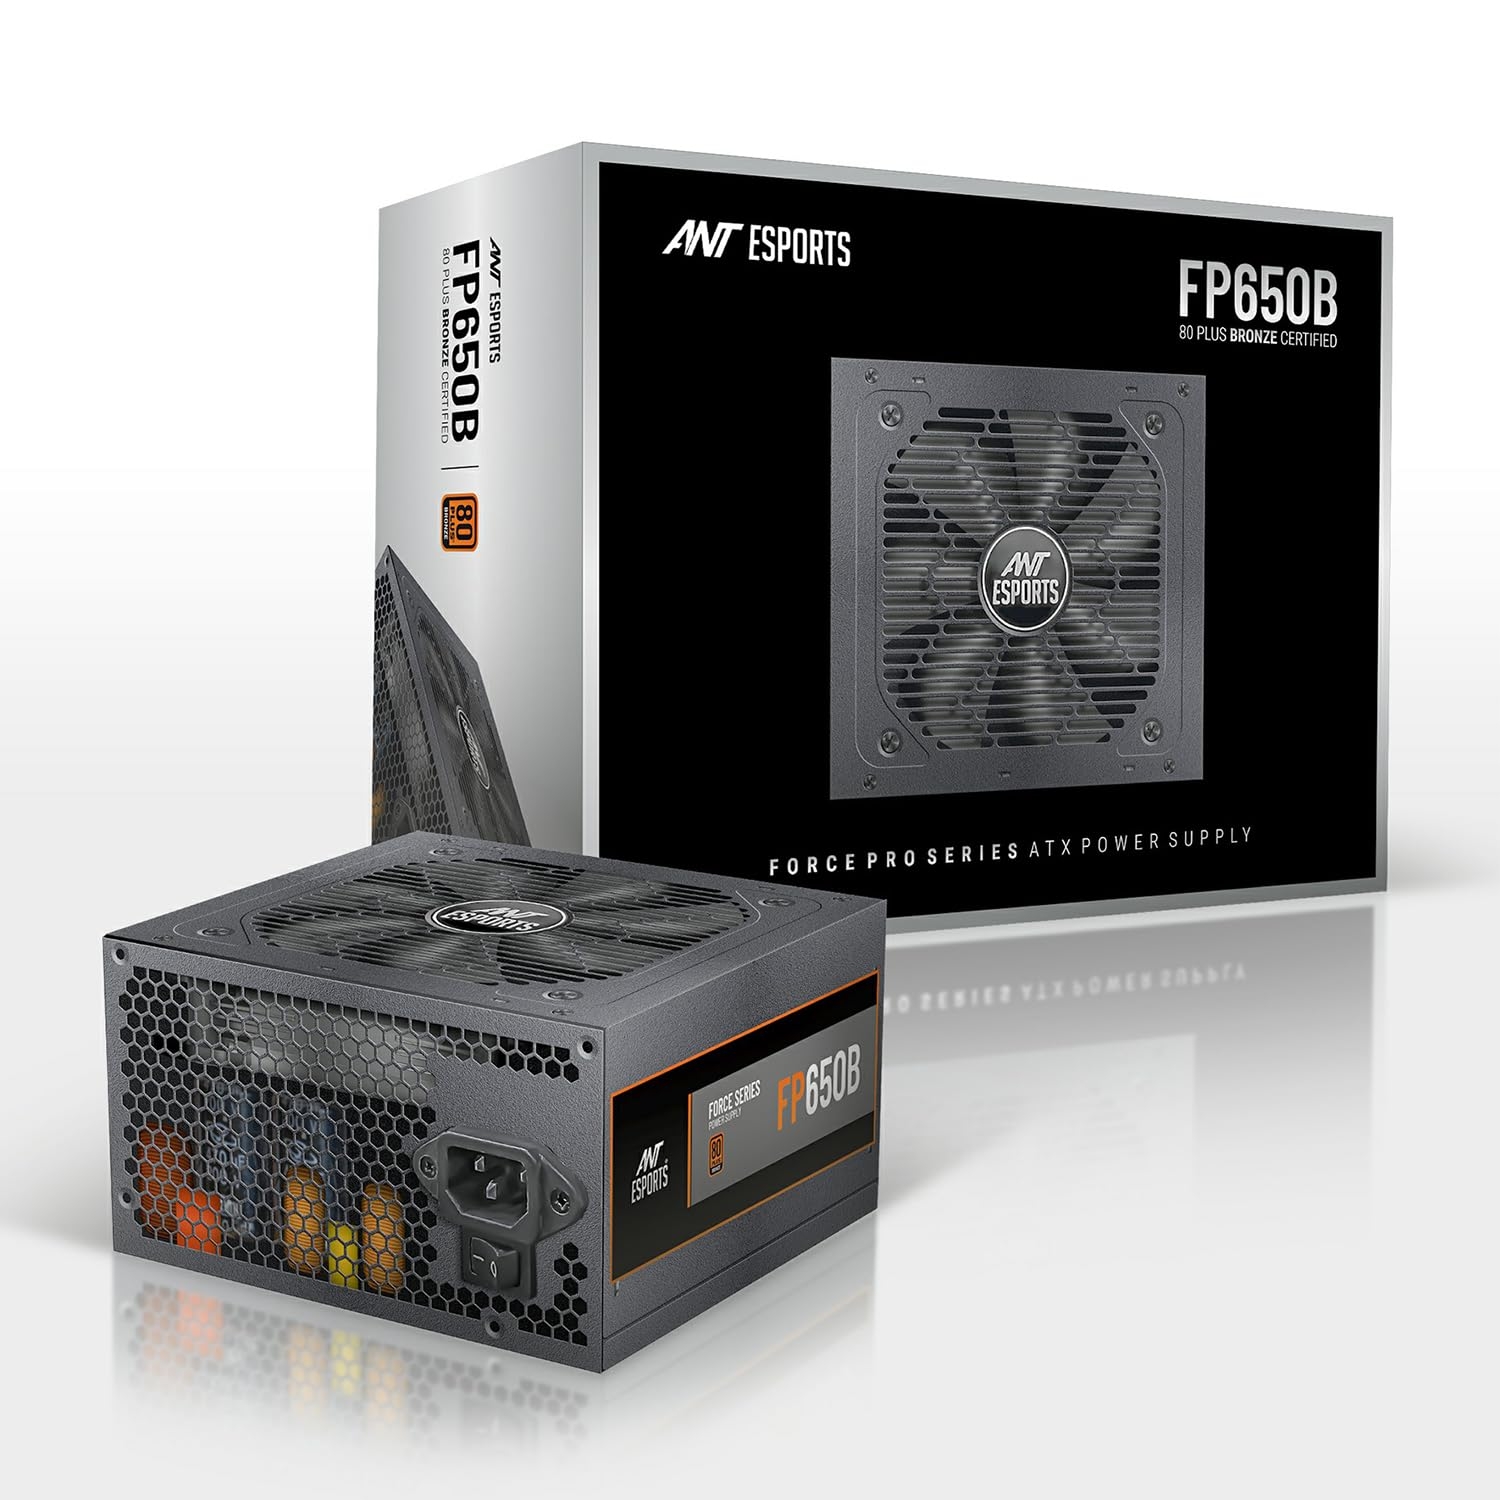 Ant Esports FP550B 80 Plus Bronze Certified Non Modular Gaming Power Supply/PSU with Active PFC, Flat Black Cables and Silent Fan